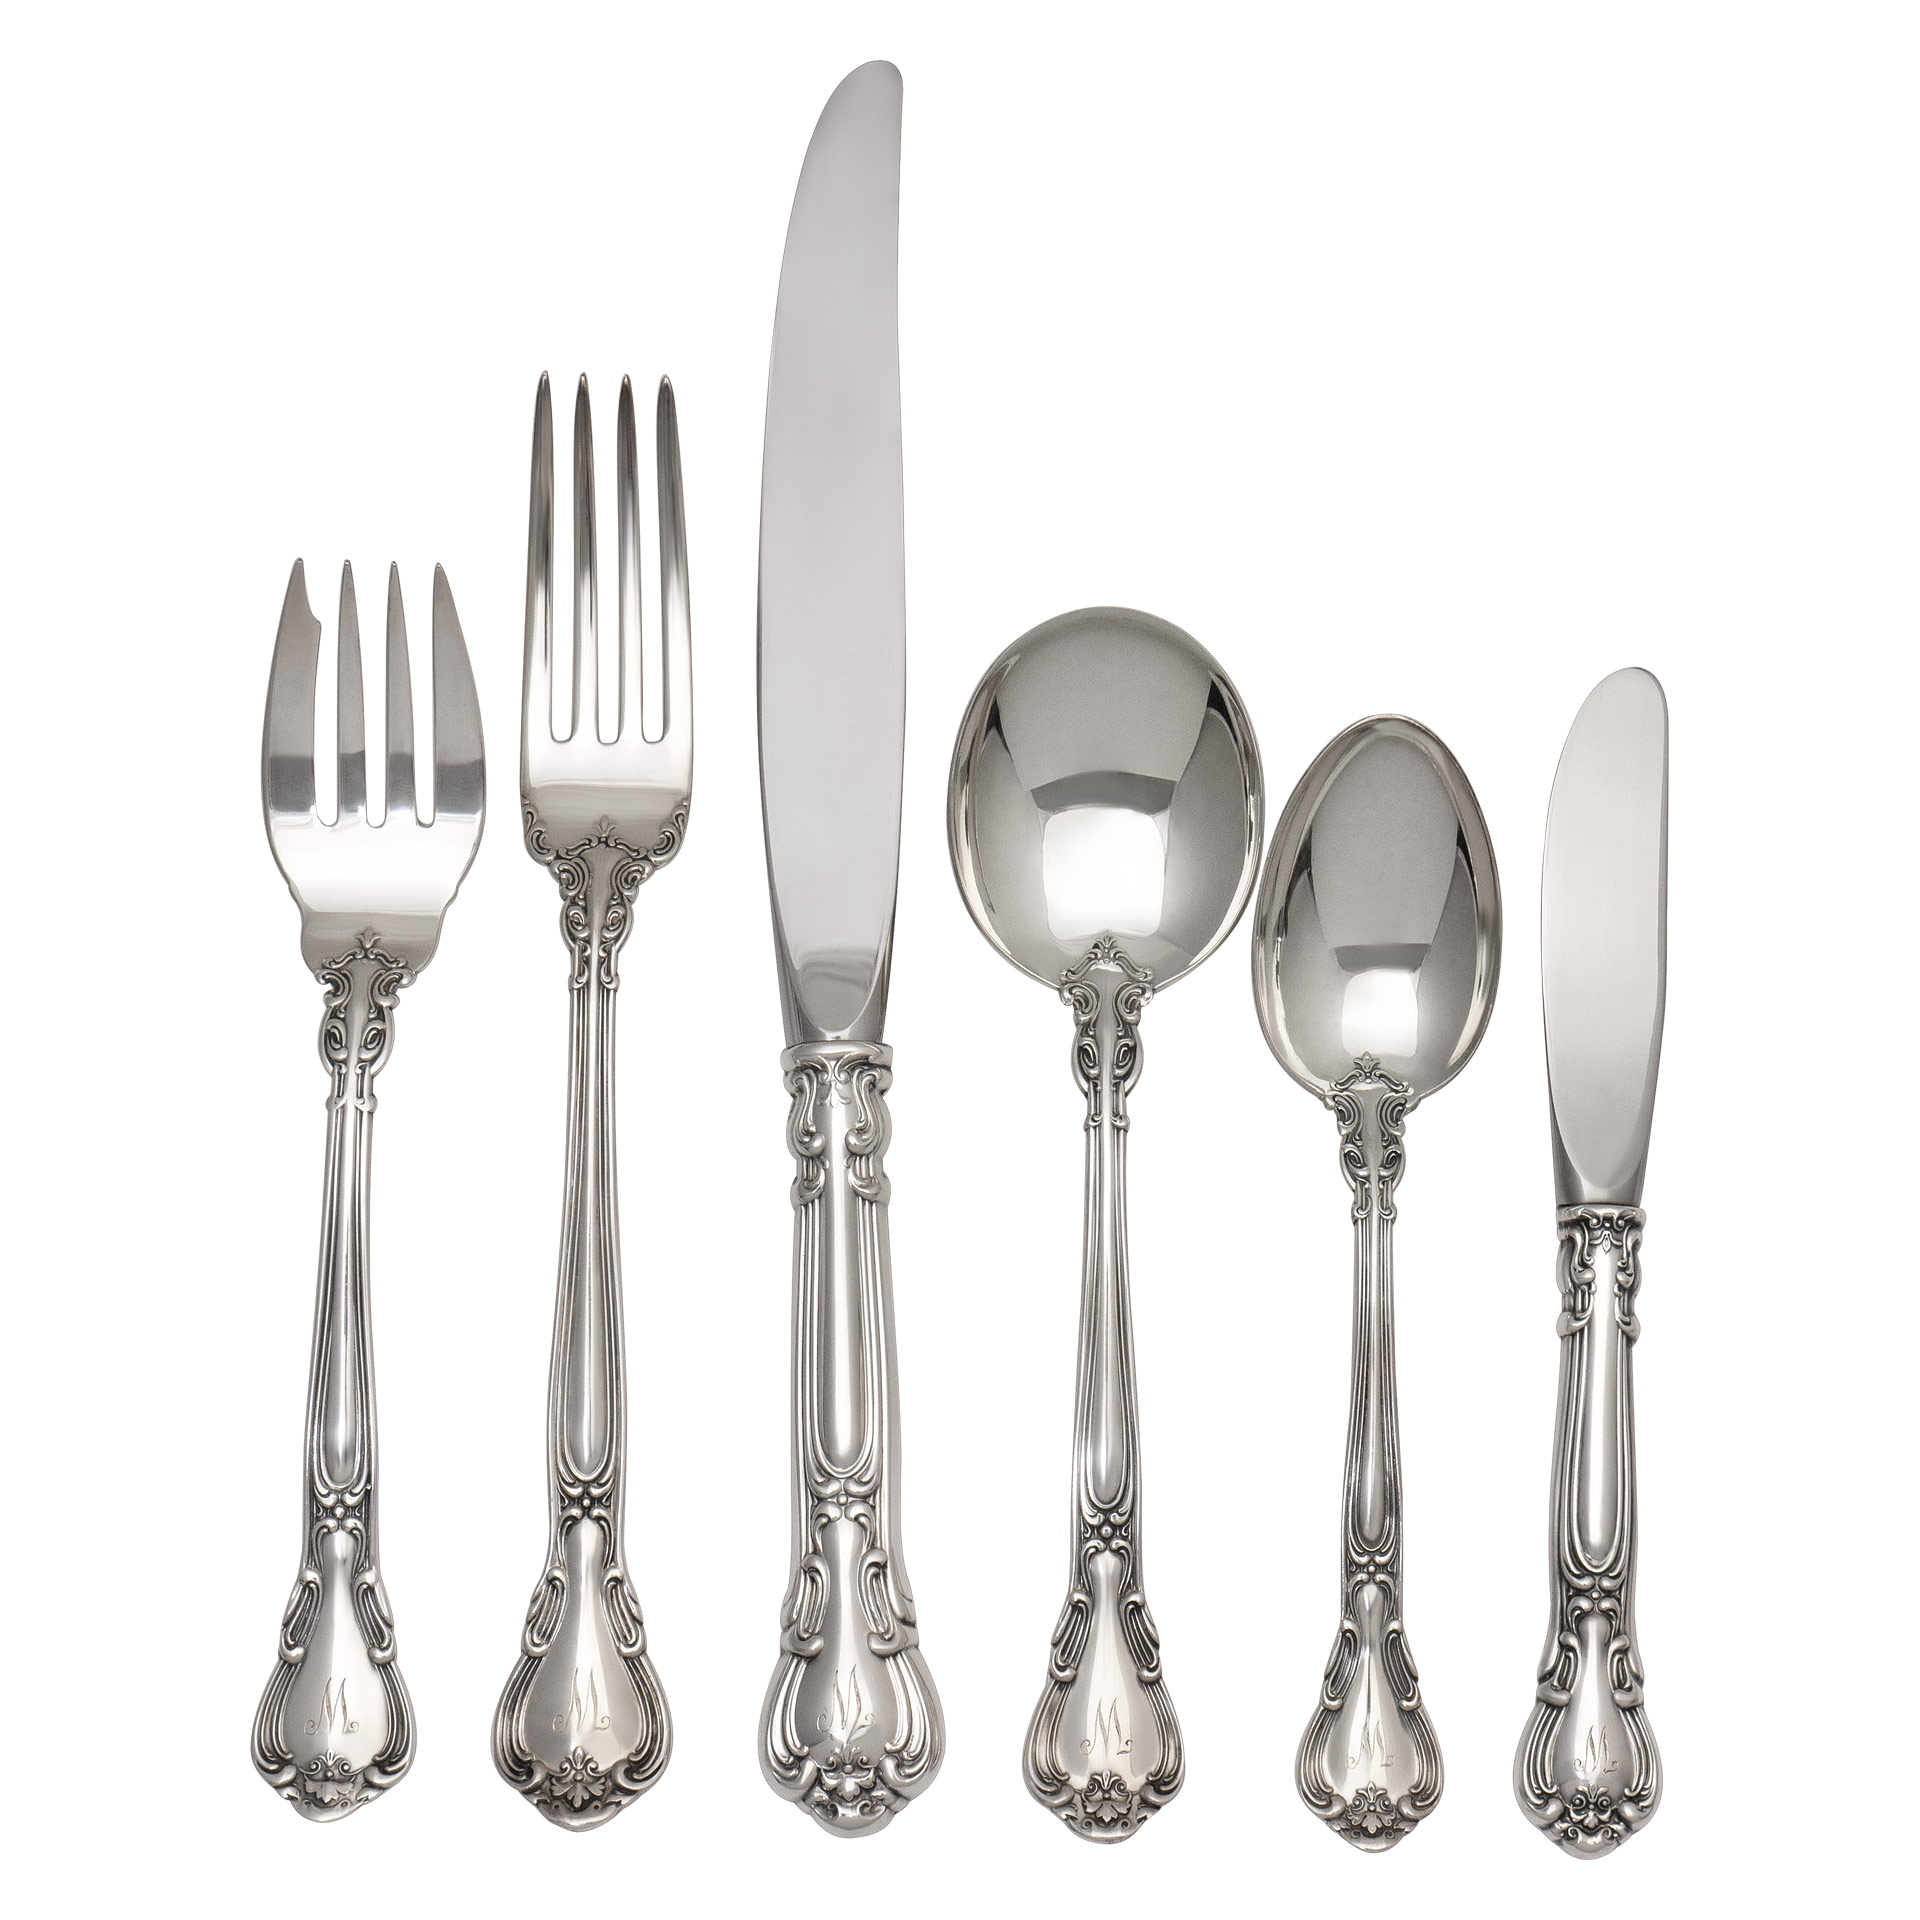 "CHANTILLY" sterling silver flatware set patented in 1895 by Gorham- 6 x 12 + 4 Serving pieces. Over 2200 grams sterling silver. image 1